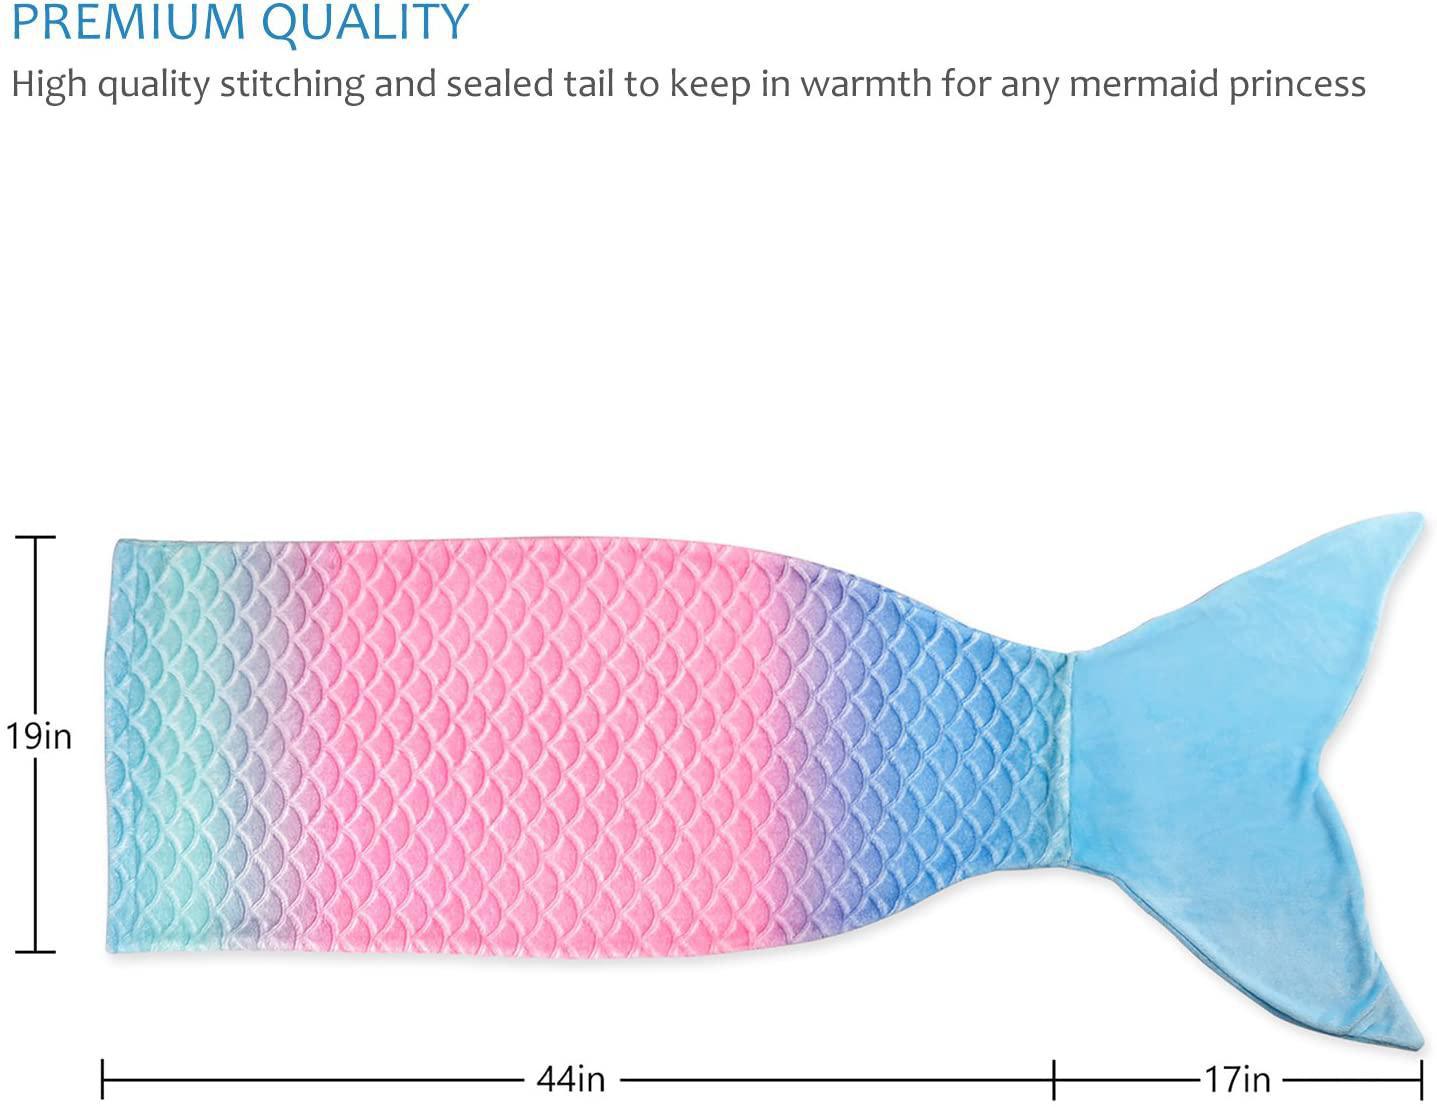 Mermaid Tail Blanket,Super Soft Plush Flannel Sleeping Snuggle Blanket for Girls,Rainbow Ombre,Fish Scale Pattern,Gift Idea